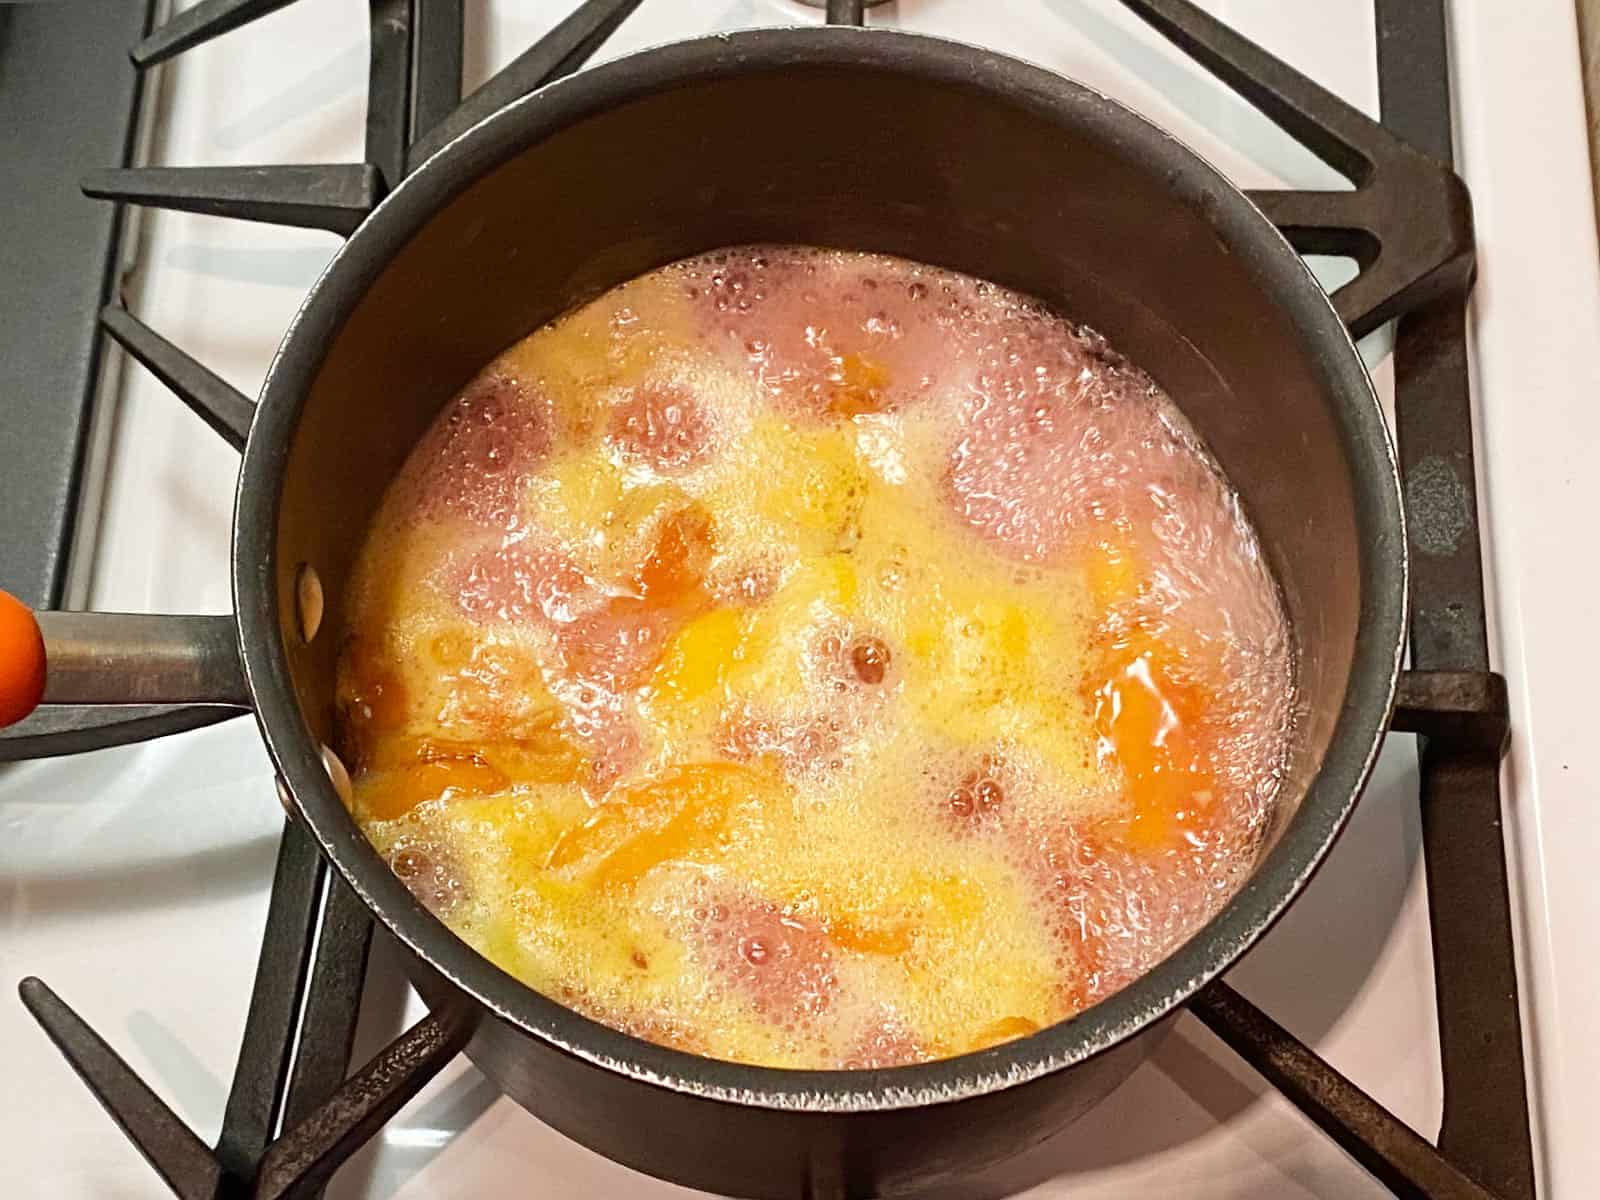 Peaches, sugar and water cooking in a pot